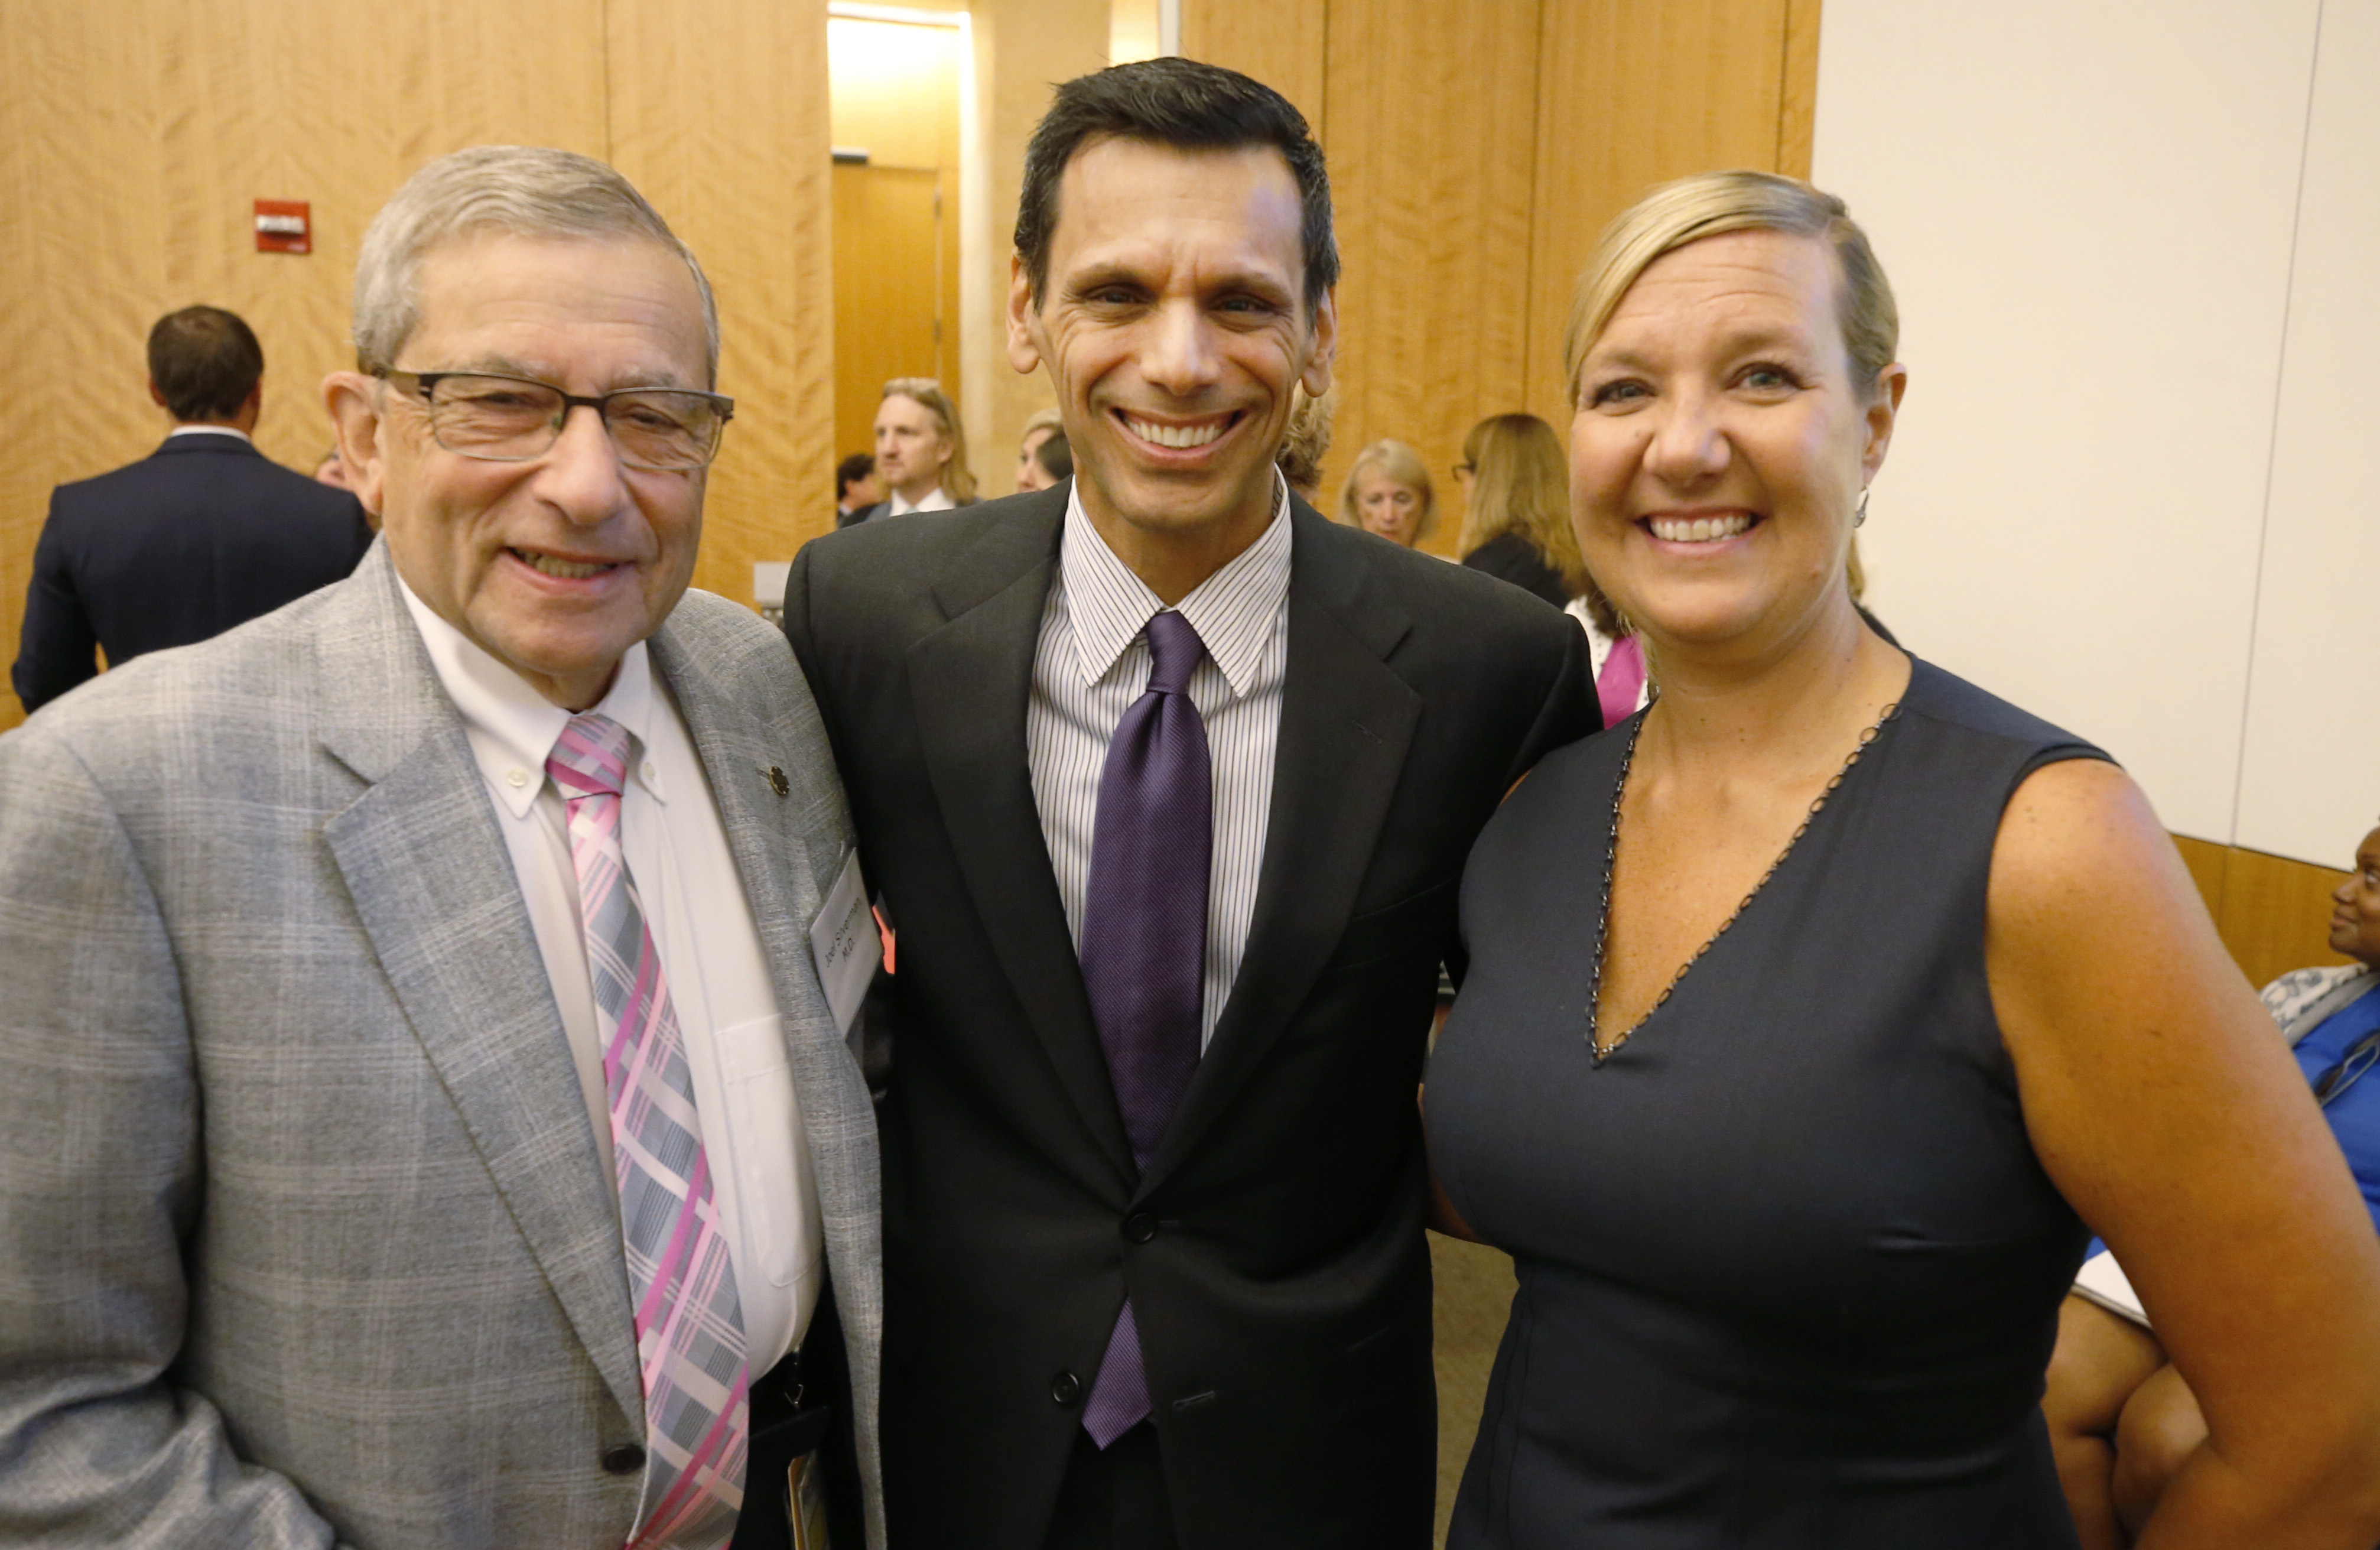 VCU President Dr. Michael Rao, who gave welcoming remarks, stands with moderators Dr. Robyn McDougle, director of the Wilder School’s Center for Public Policy, and Joel Silverman, M.D., chair of the Department of Psychiatry. 